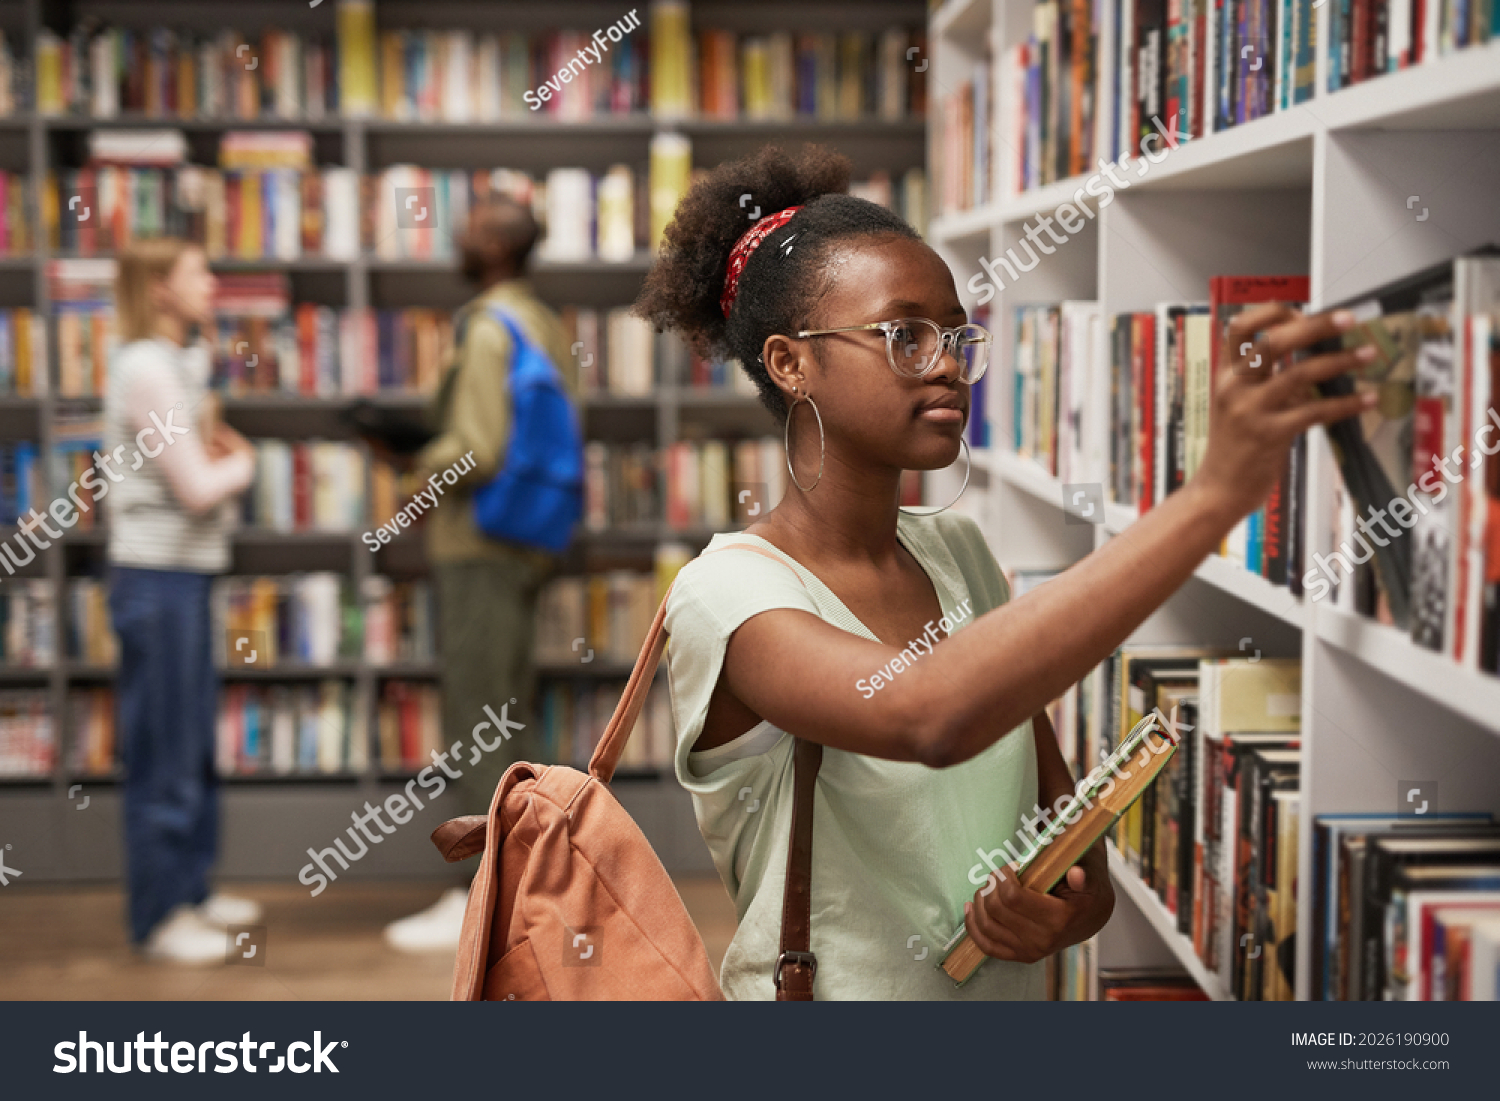 Waist up portrait of female Africa-American student choosing books in college library, copy space #2026190900